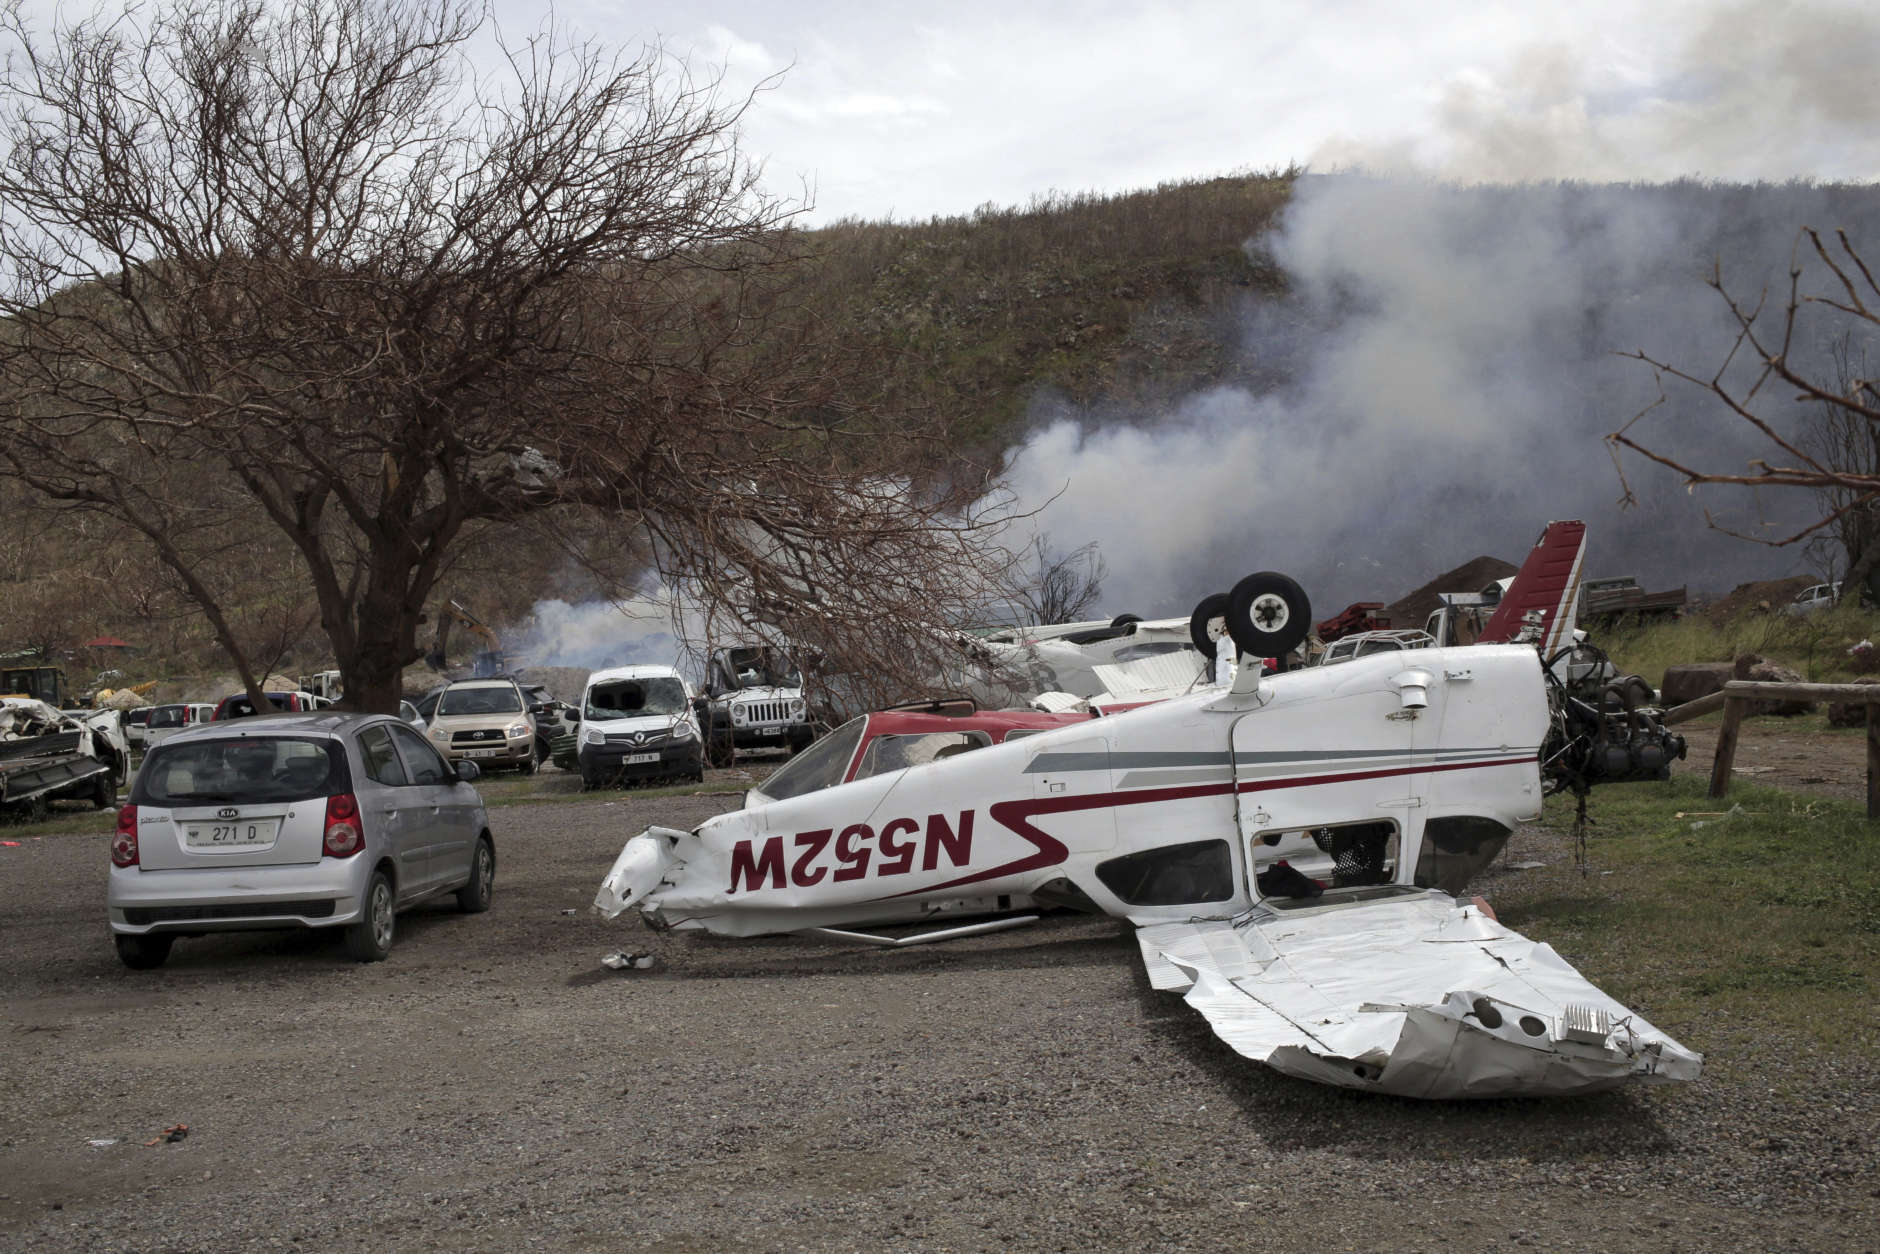 A small plane lays flipped over, one week after the passing of Hurricane Irma, at the airport parking lot on the outskirts of Gustavia, St. Barthelemy, part of the French Antilles, Monday, Sept. 18, 2017. Hurricane Maria is passing far south of St. Barthelemy on Tuesday and charging into the eastern Caribbean that threatens islands already devastated by Hurricane Irma. (Enrico Dagnino via AP)